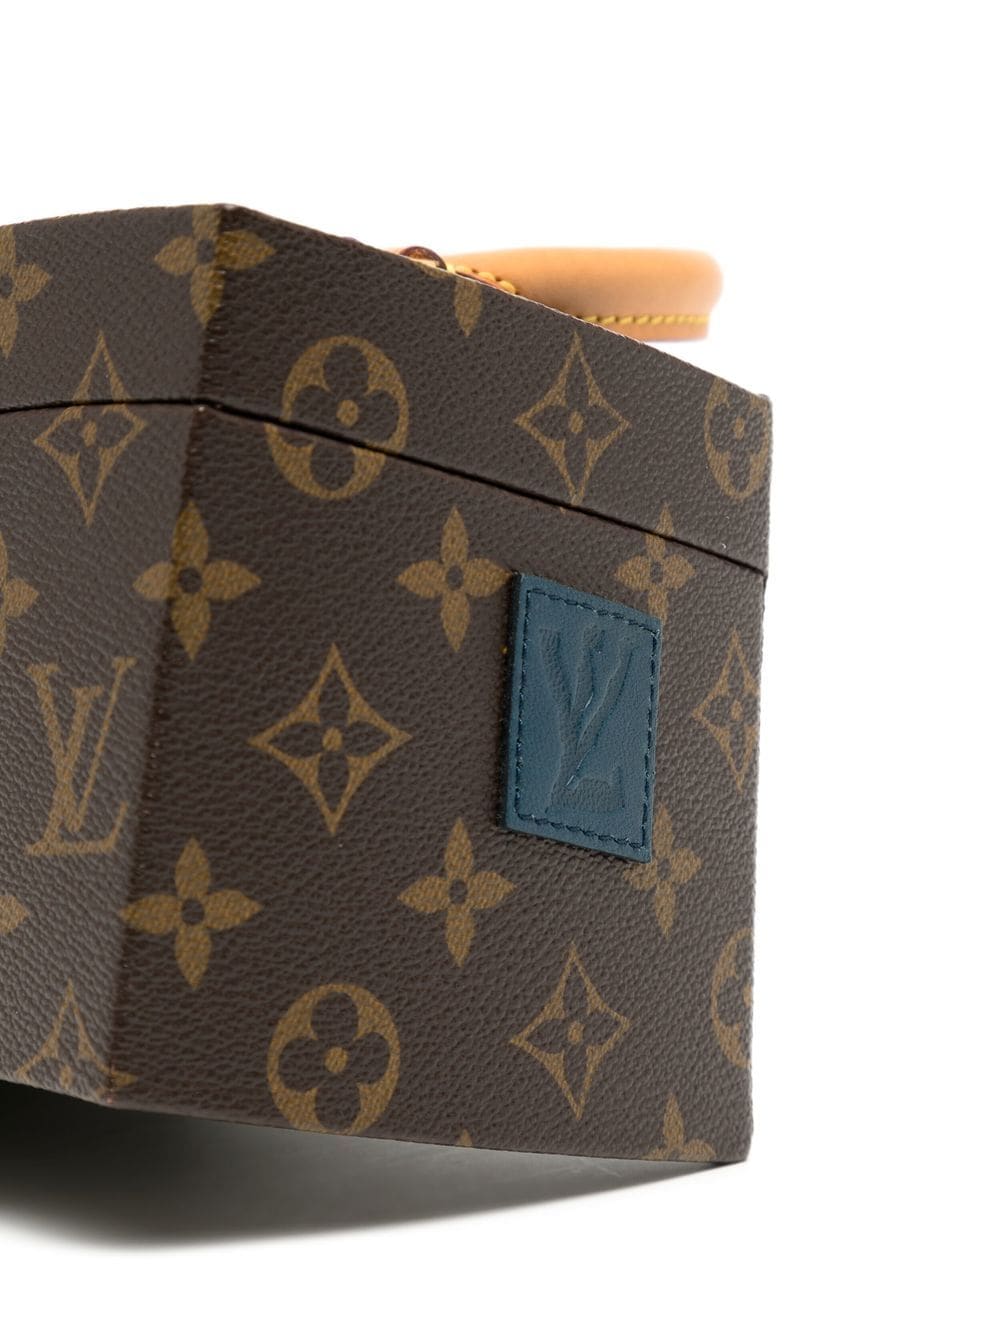 Pre-owned Louis Vuitton X Frank Gehry 2014 Monogram Twisted Box In Brown